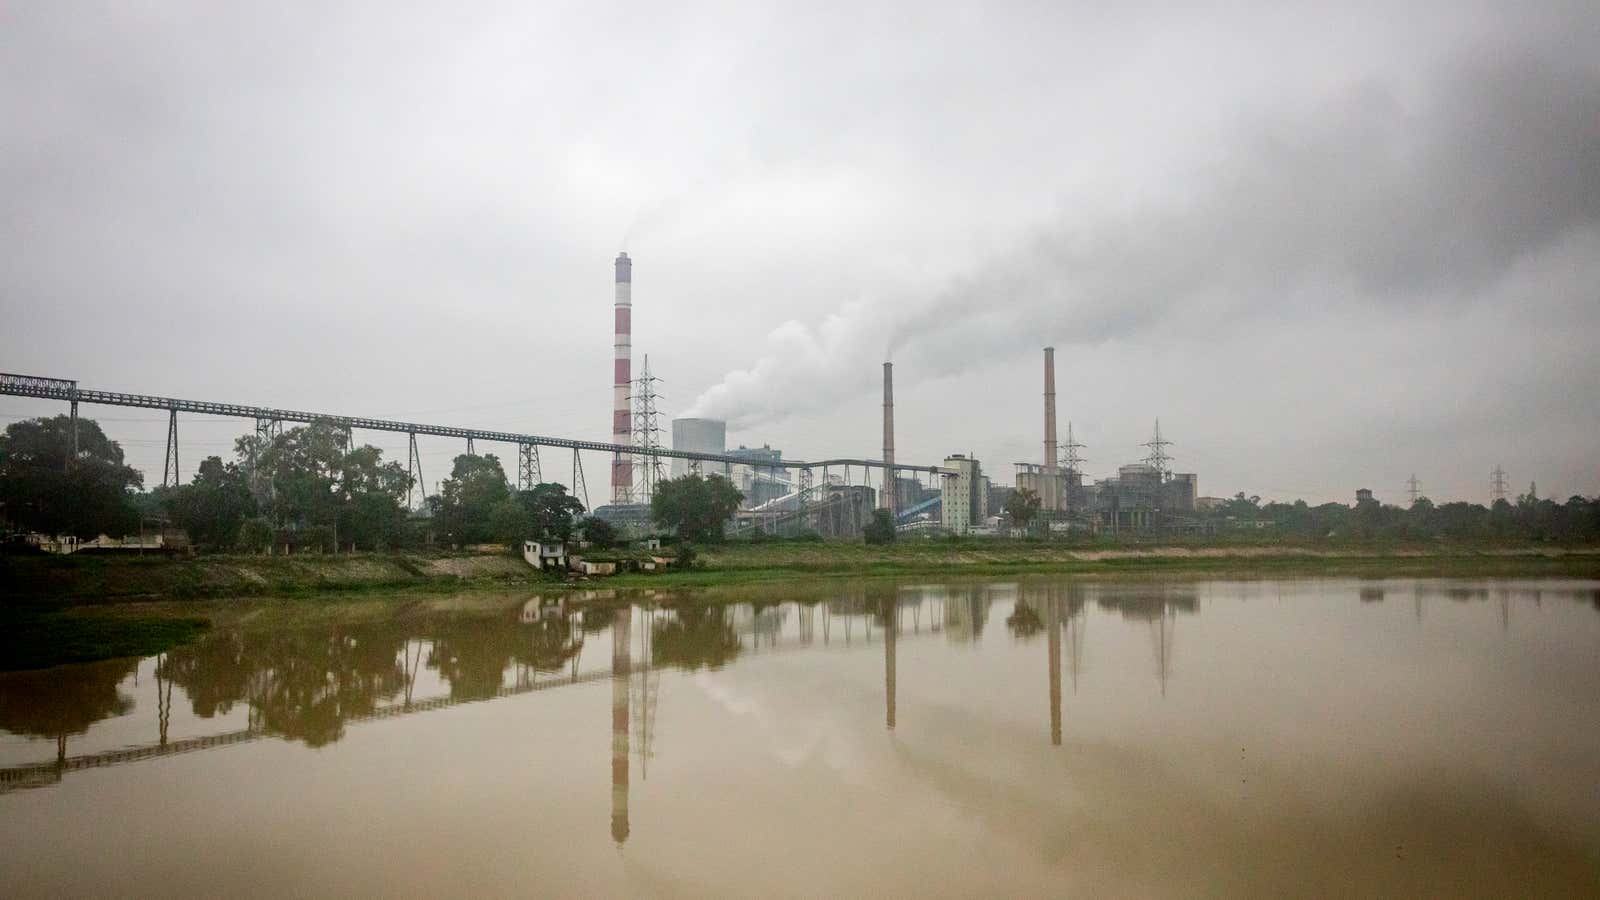 Hasdeo Thermal Power Station in Darri receives coal from nearby mines in Korba in Chhattisgarh, India.